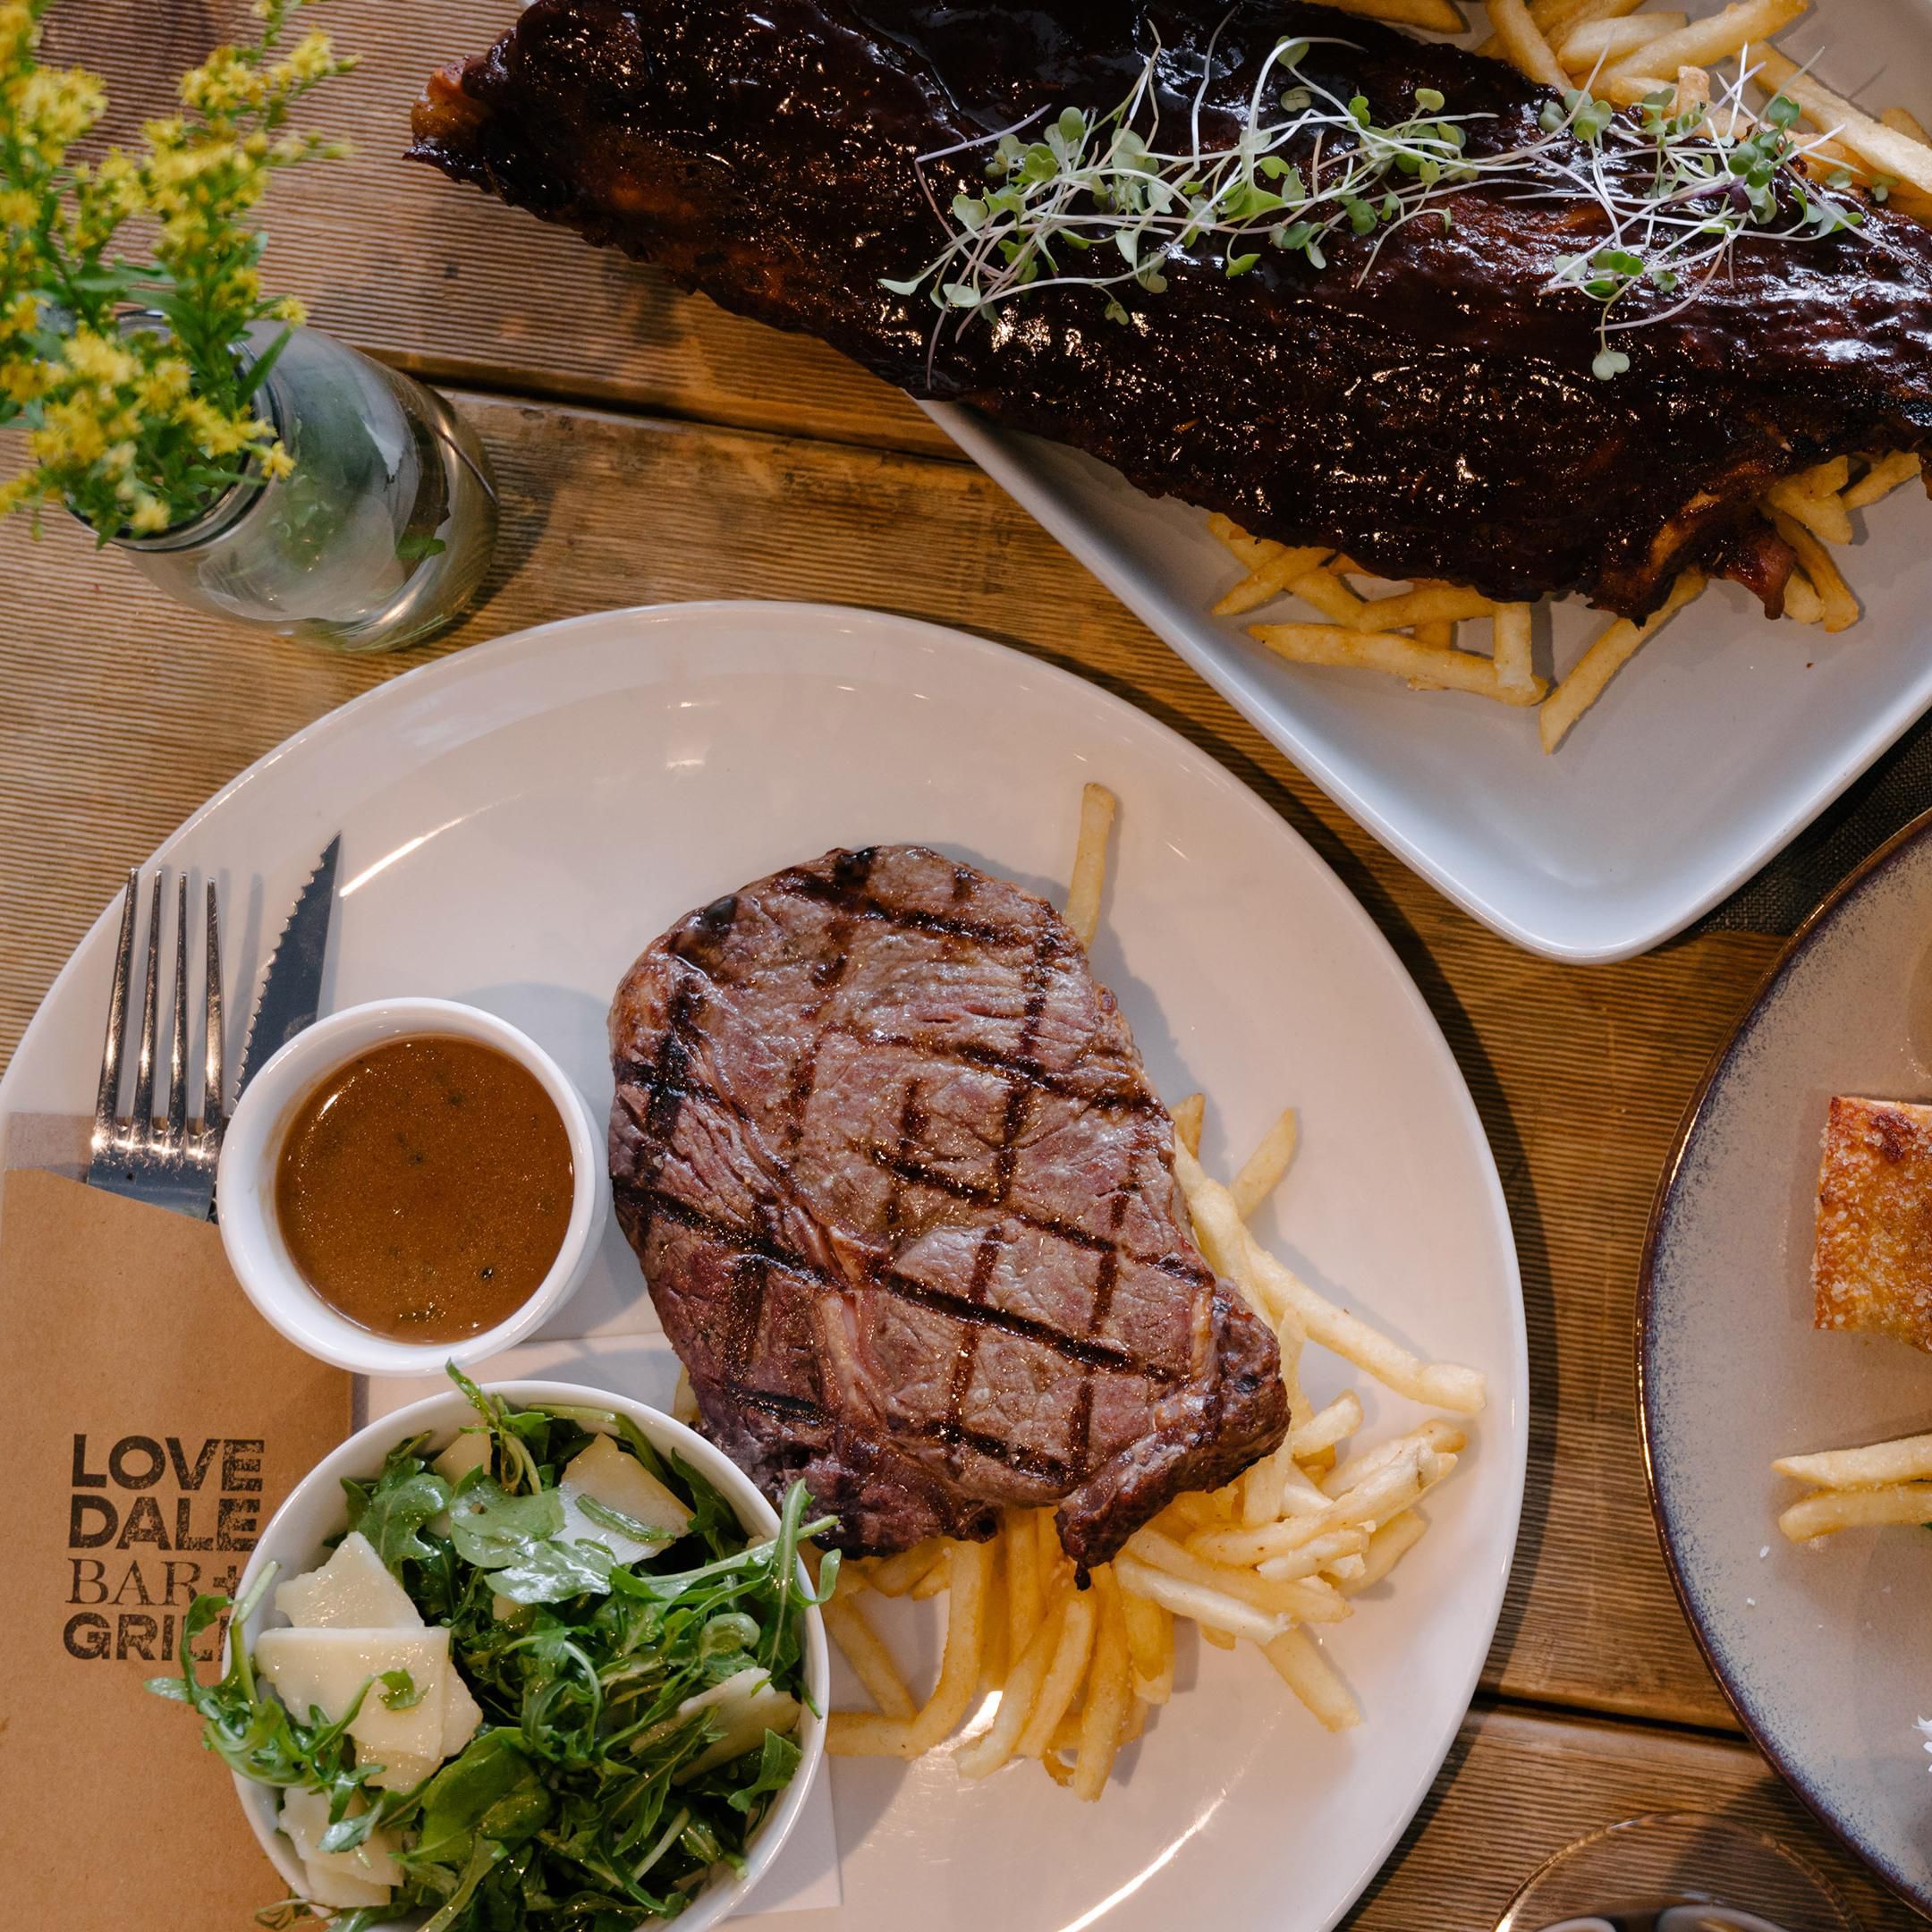 Food at Lovedale Bar + Grill